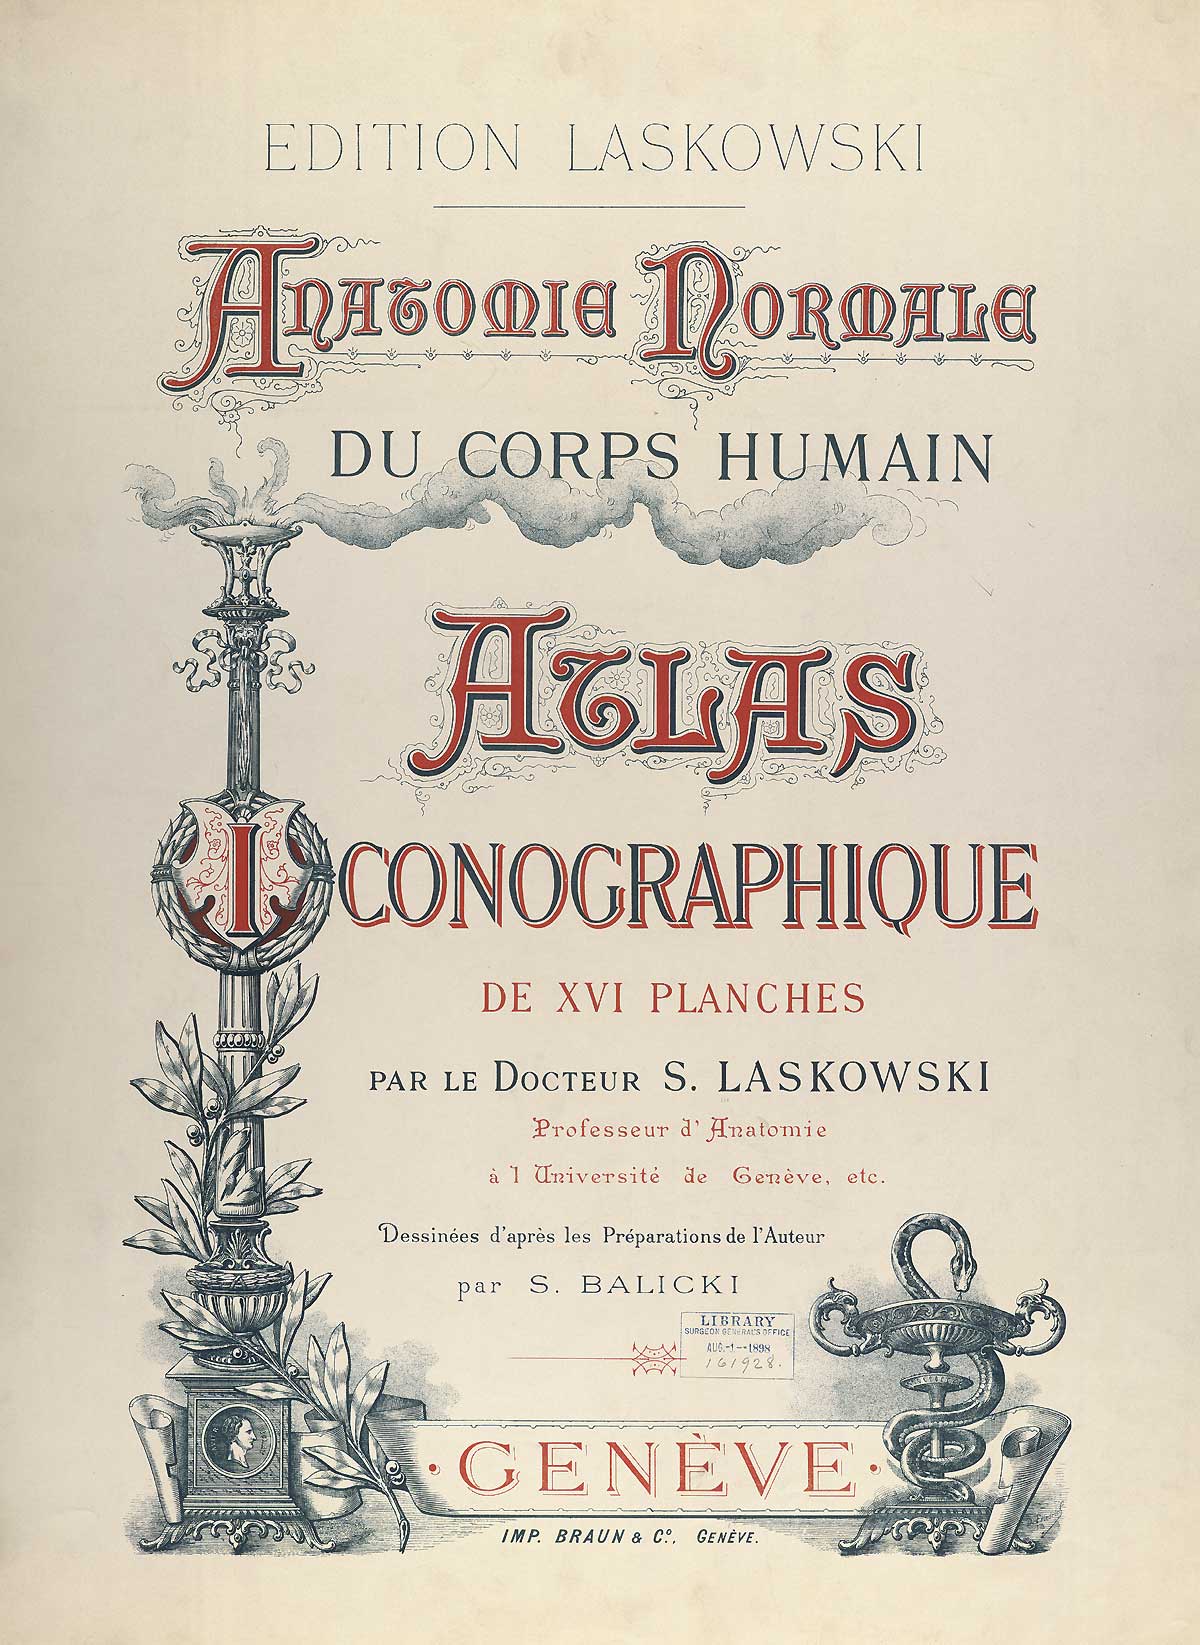 Titlepage of Sigismond Laskowski's Anatomie normale du corps humain: atlas iconographique de XVI planches, featuring the illuminated opening giving the title of the treatise in Arabic (hadha kitab Tashrih al-badan), drawn in ink and opaque watercolours.